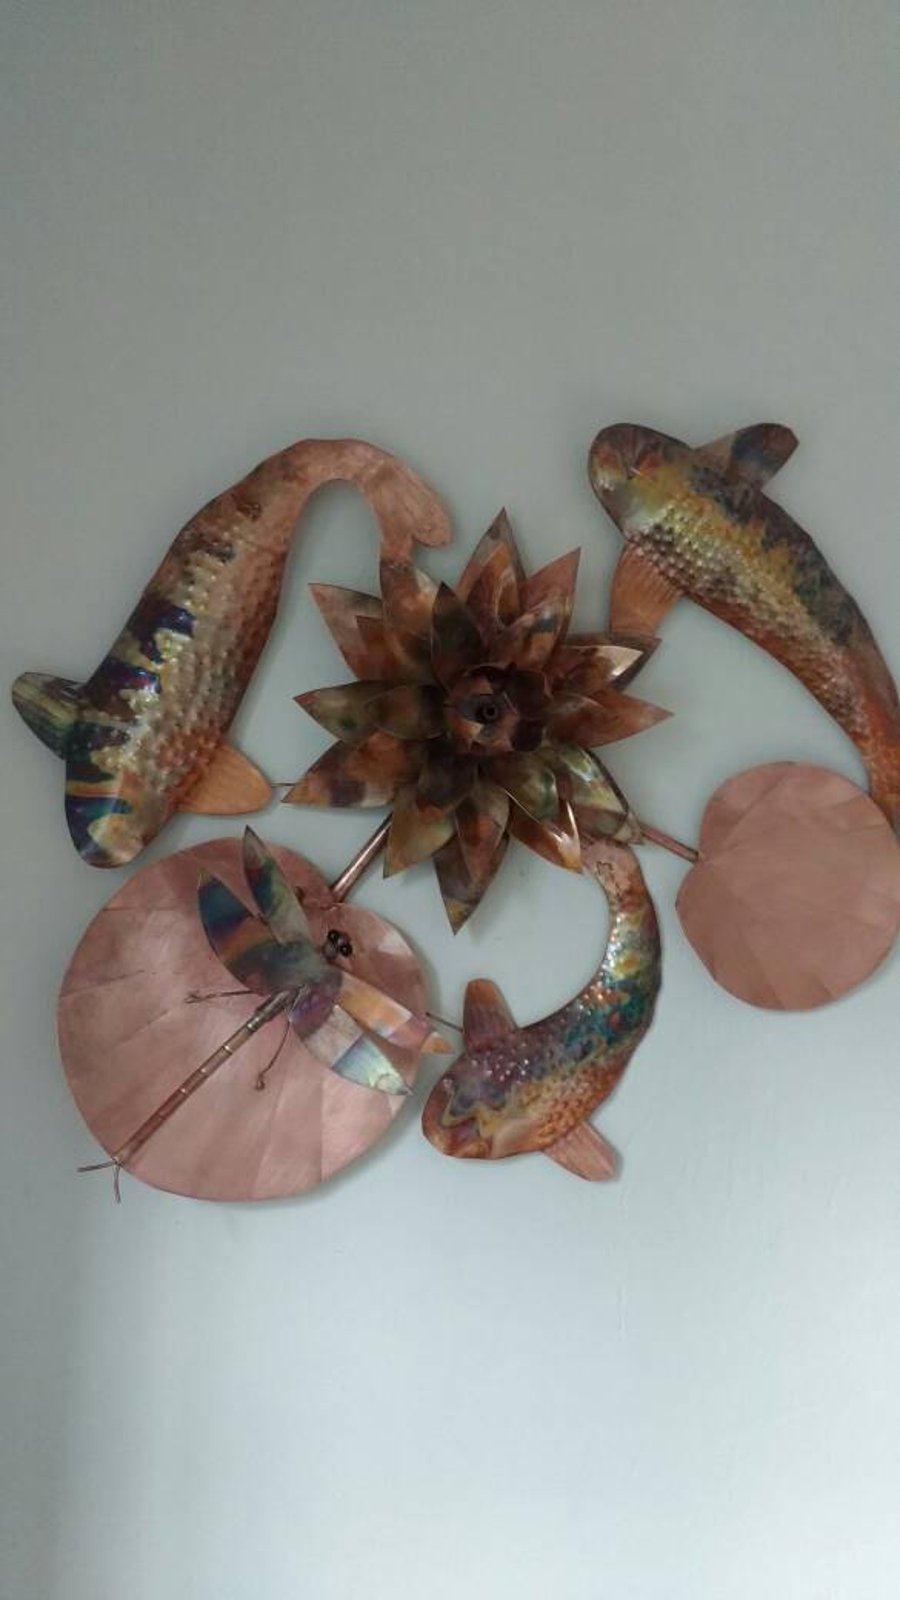 Water lily, koi carp and dragonfly wall hanging